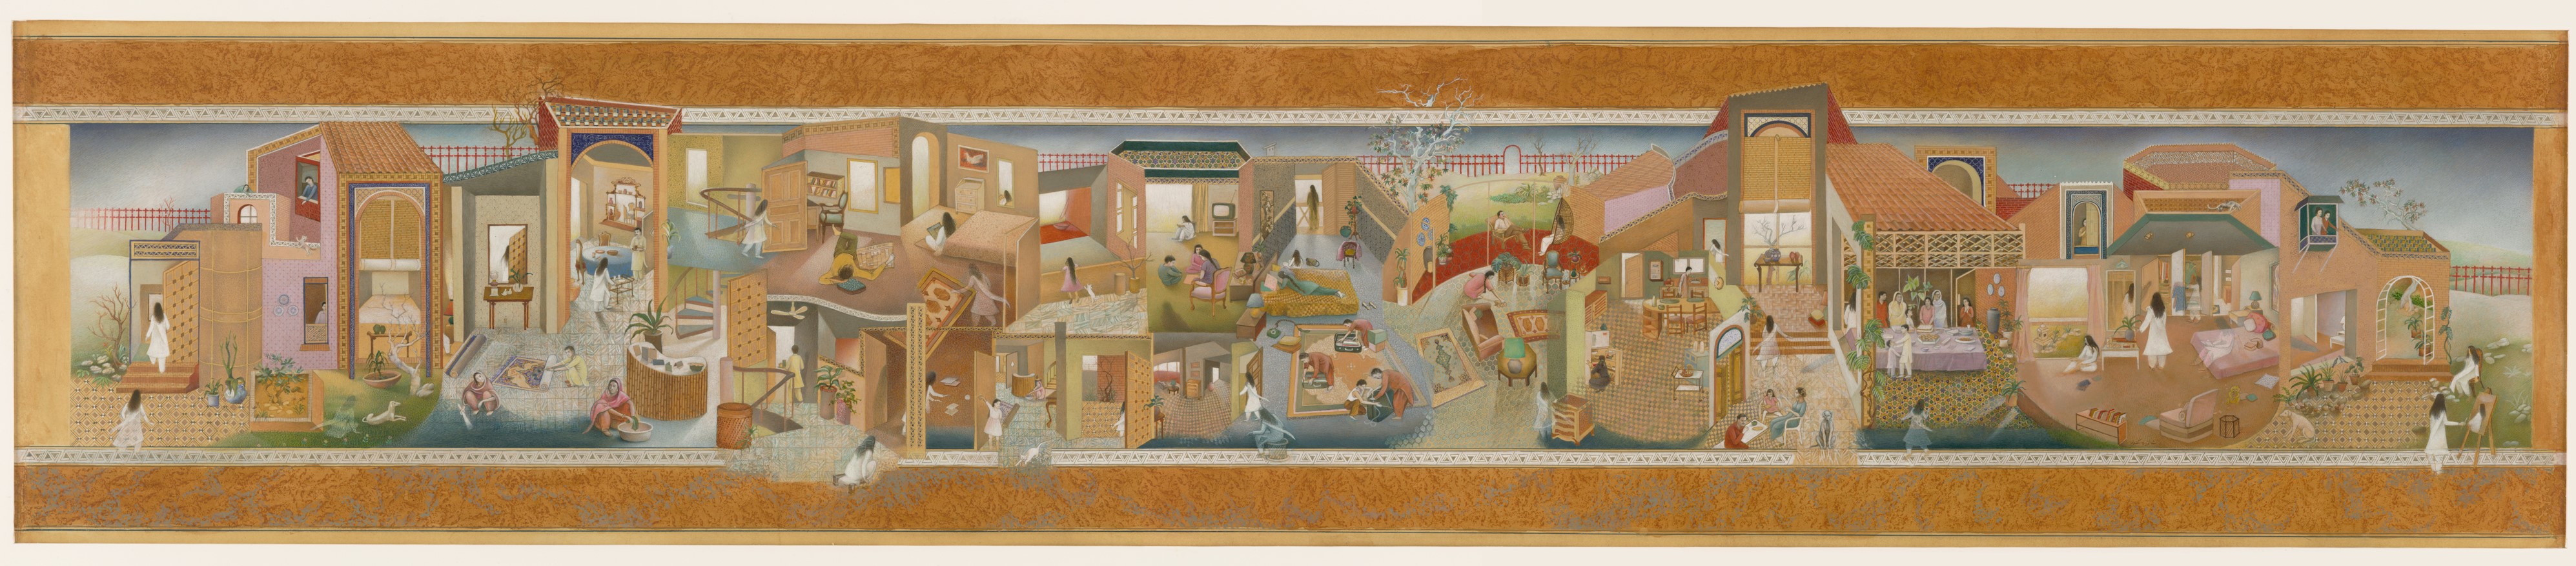 A long, rectangular painting featuring continuous scenes of a family inside fragmentary depictions of a house.